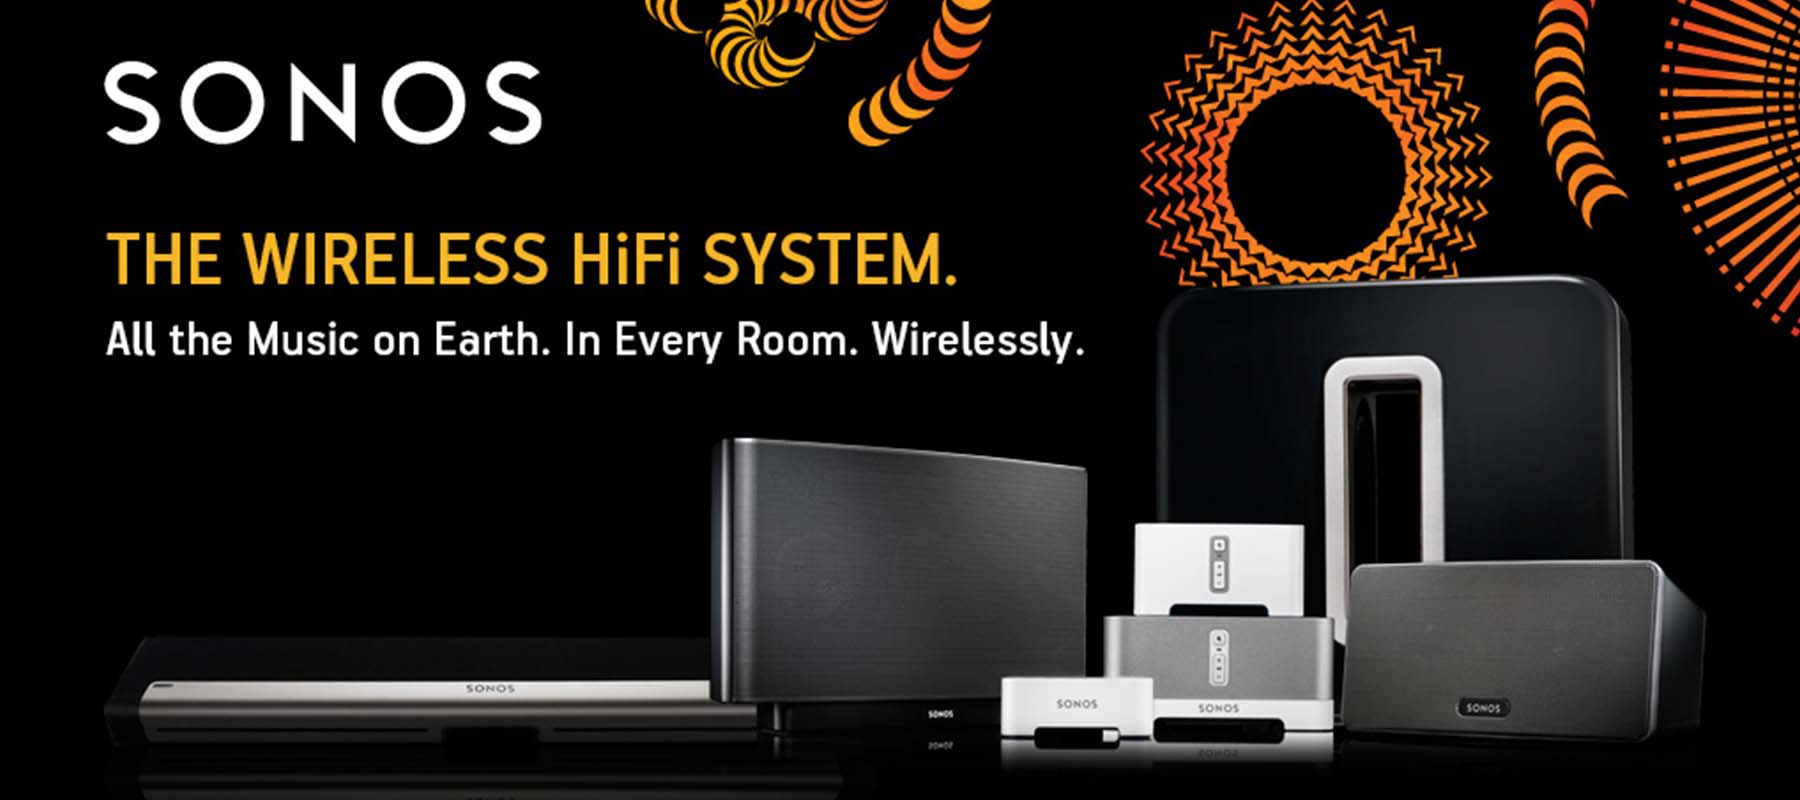 we update and install sonos speakers